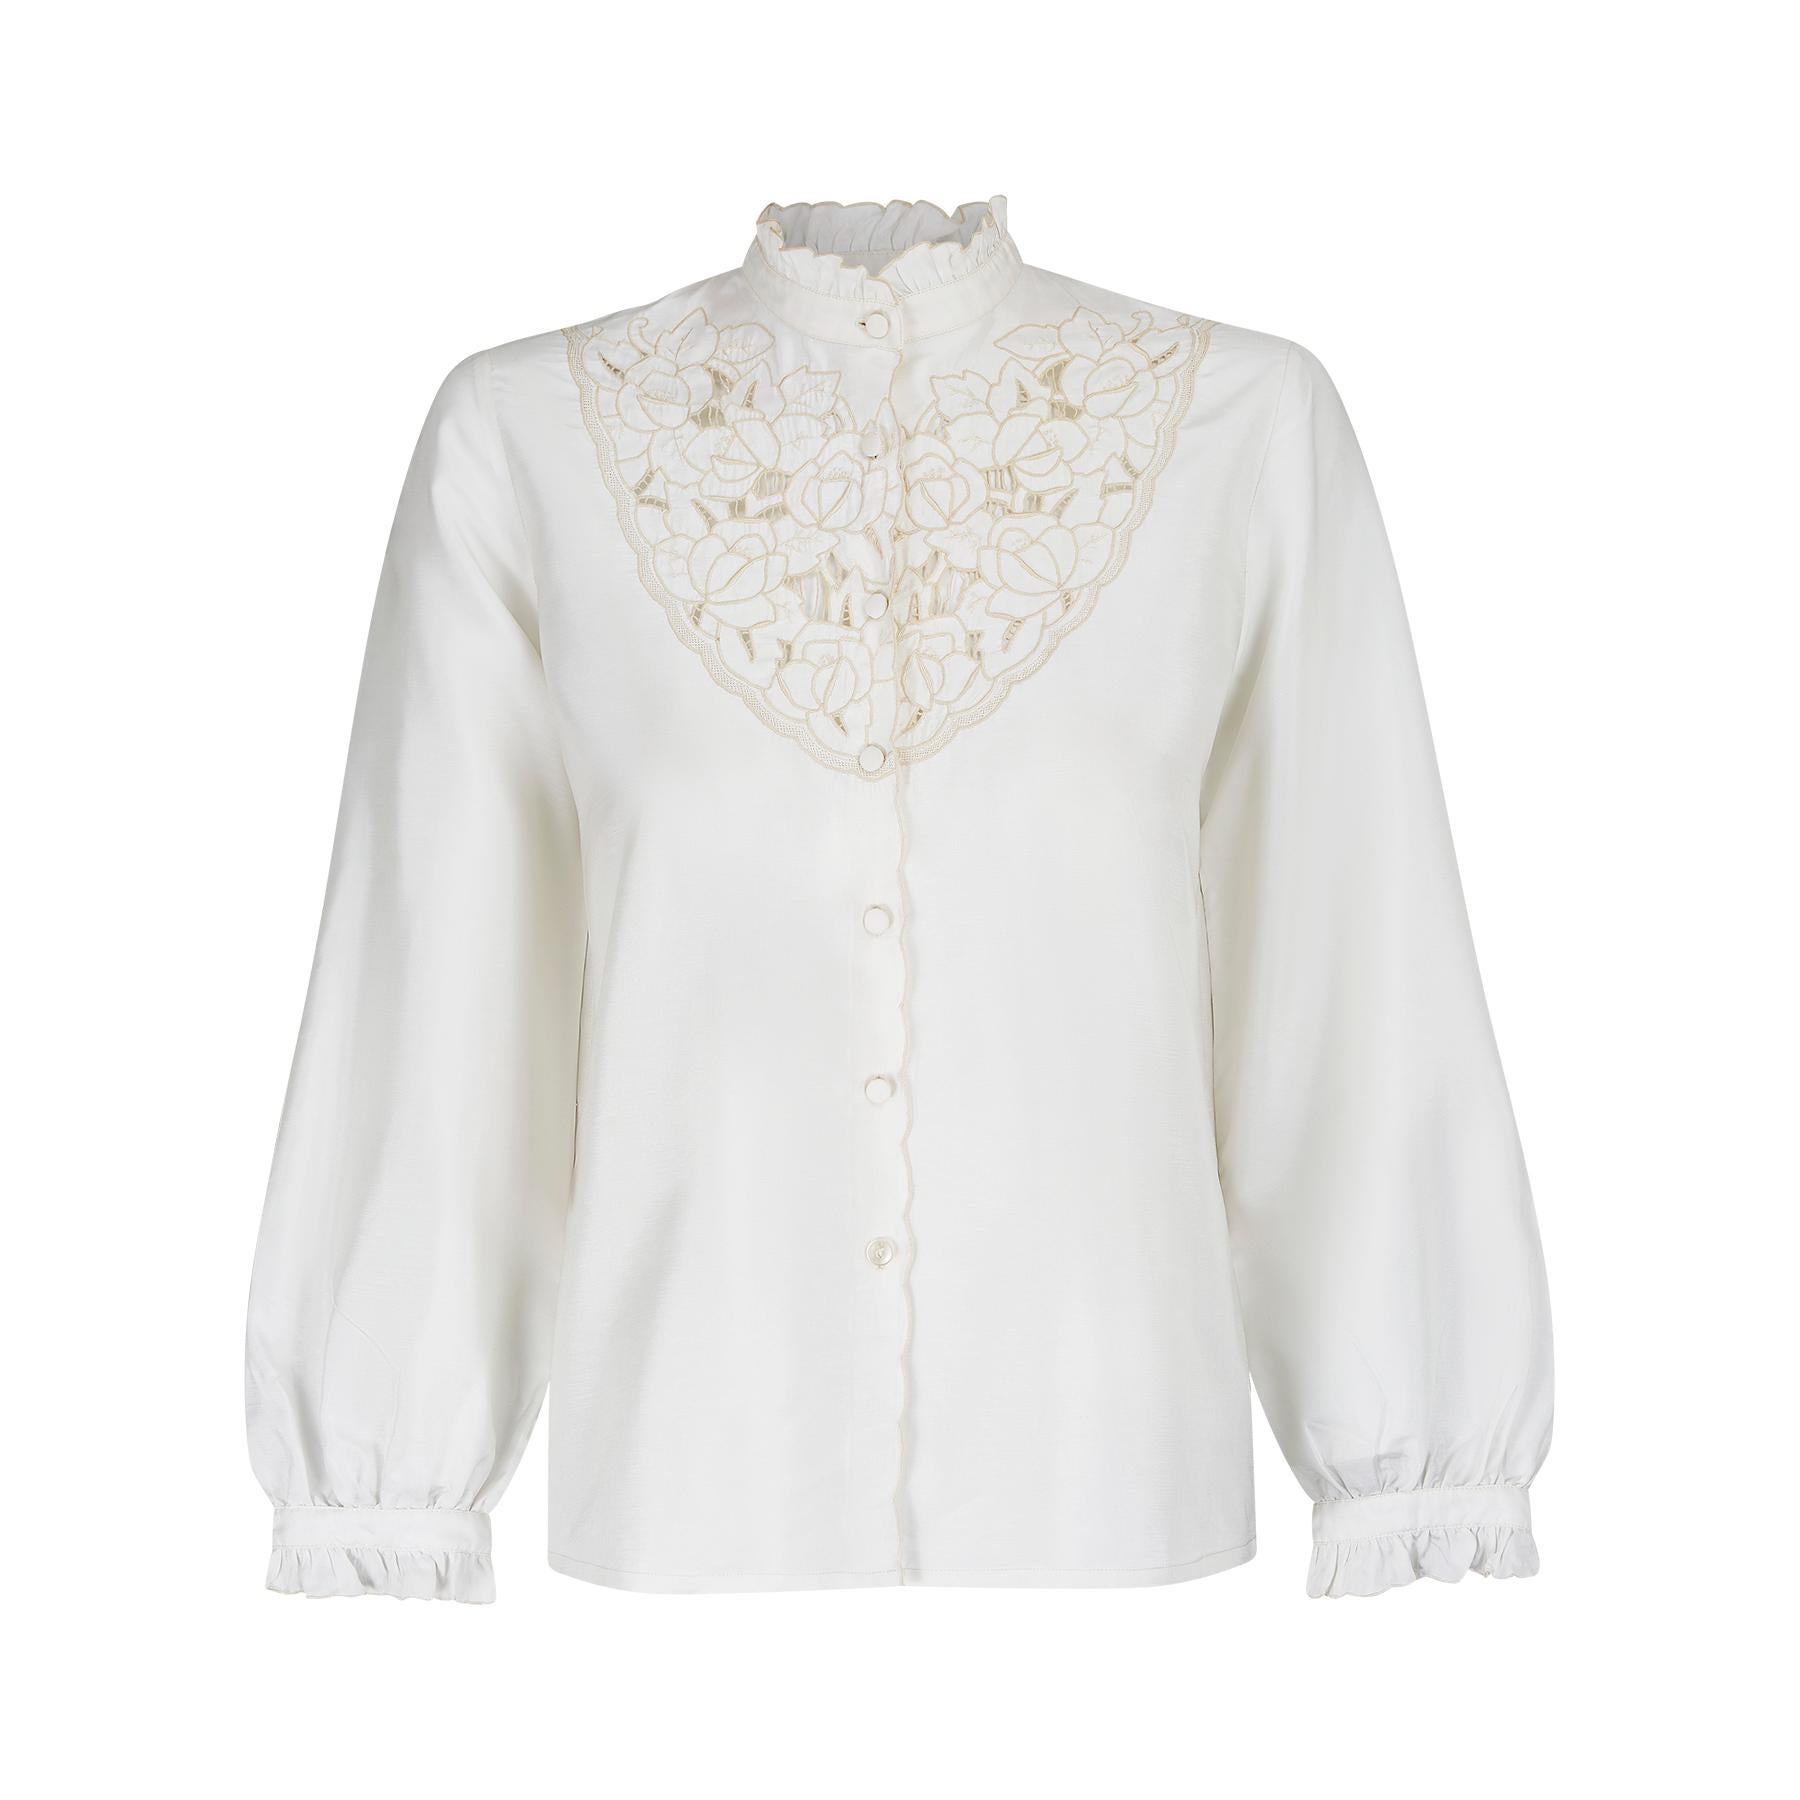 We really love these types of blouses and although this one is unlabelled, it was most likely made in the Far East in the 1960s or 1970s. It feels like a silky man-made blend. The entire bib area of the neck is embroidered and has cut out elements